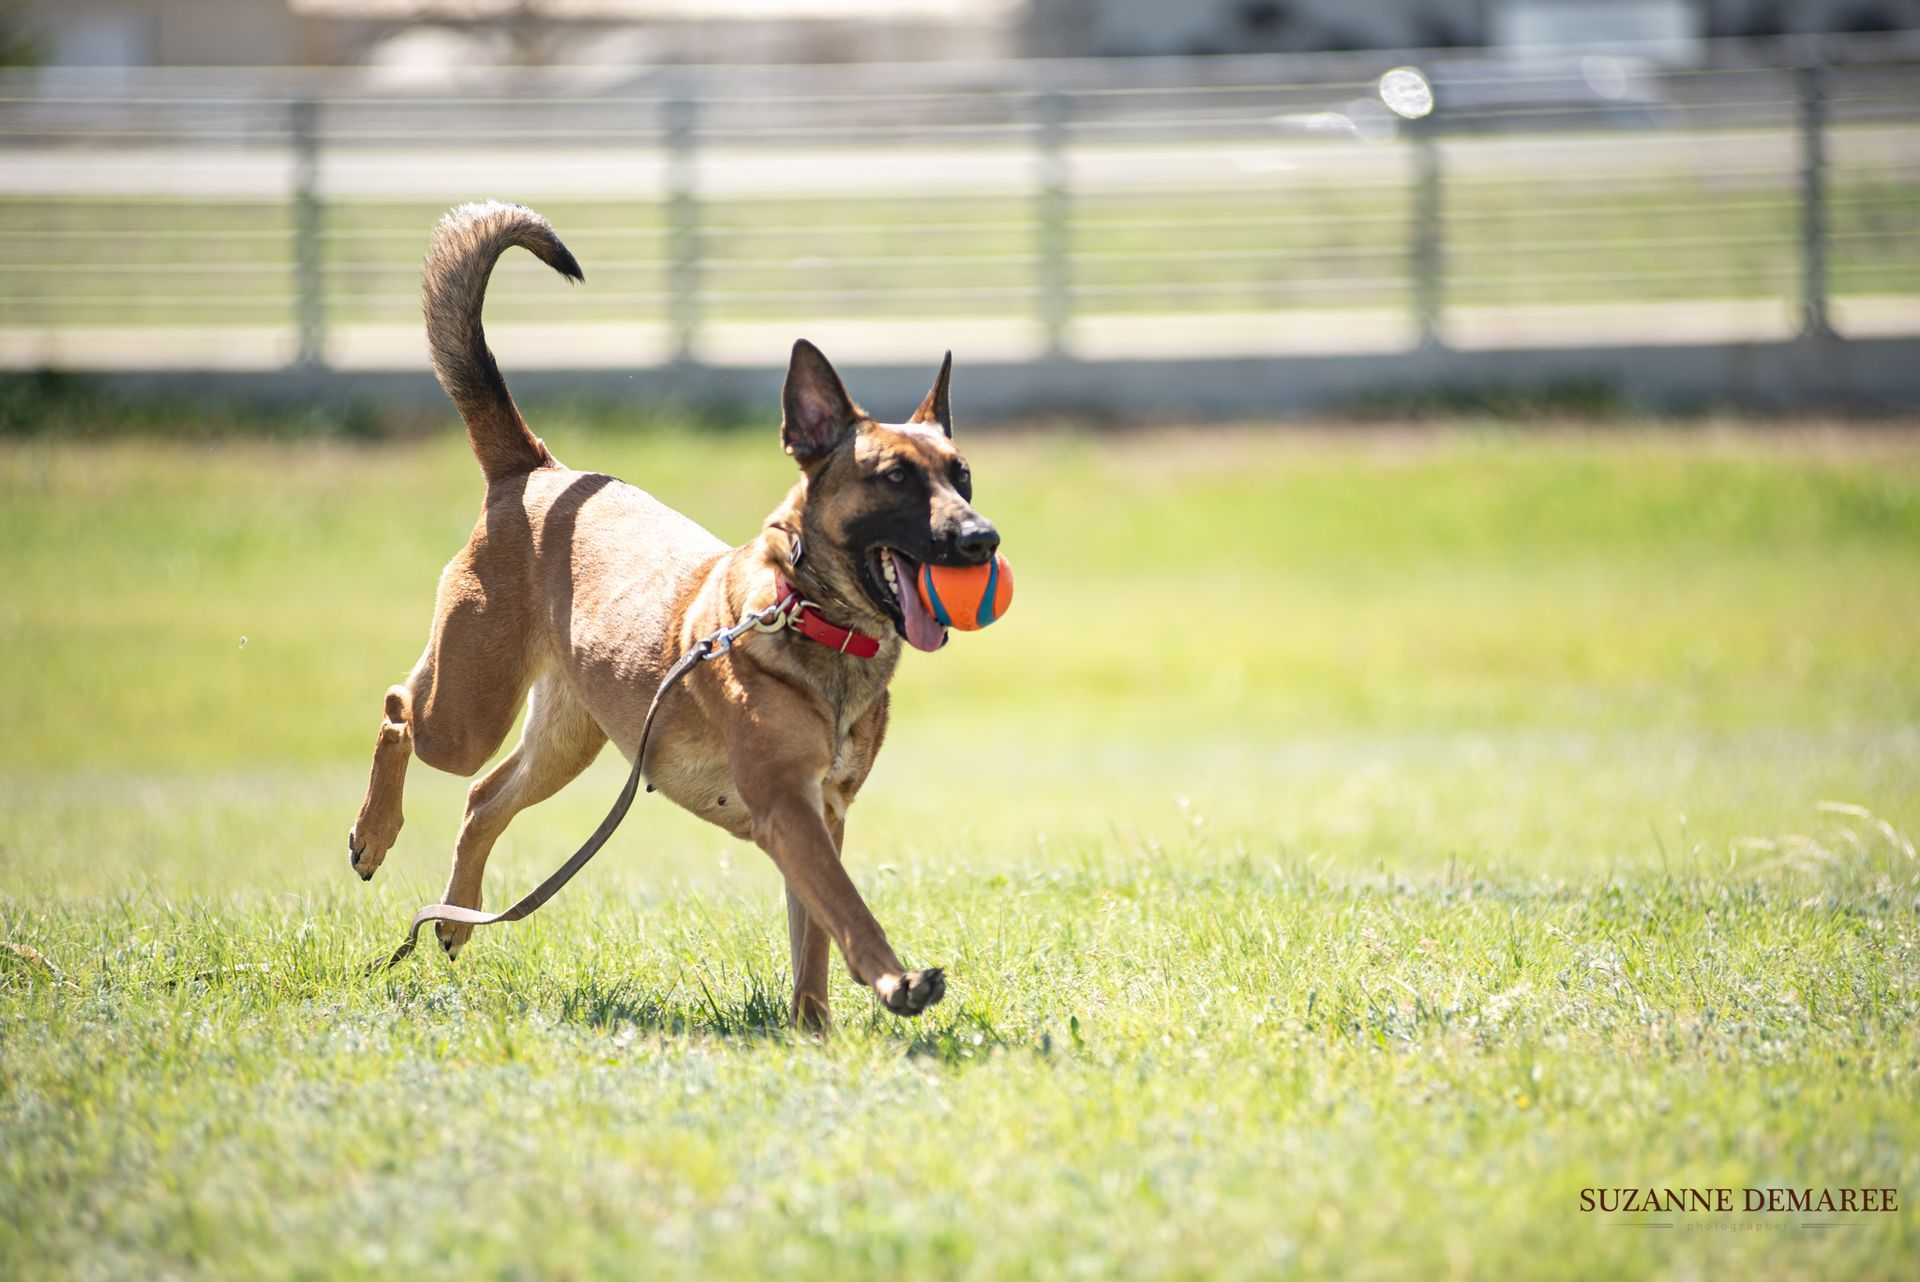 A dog is running with a ball in its mouth in a field.